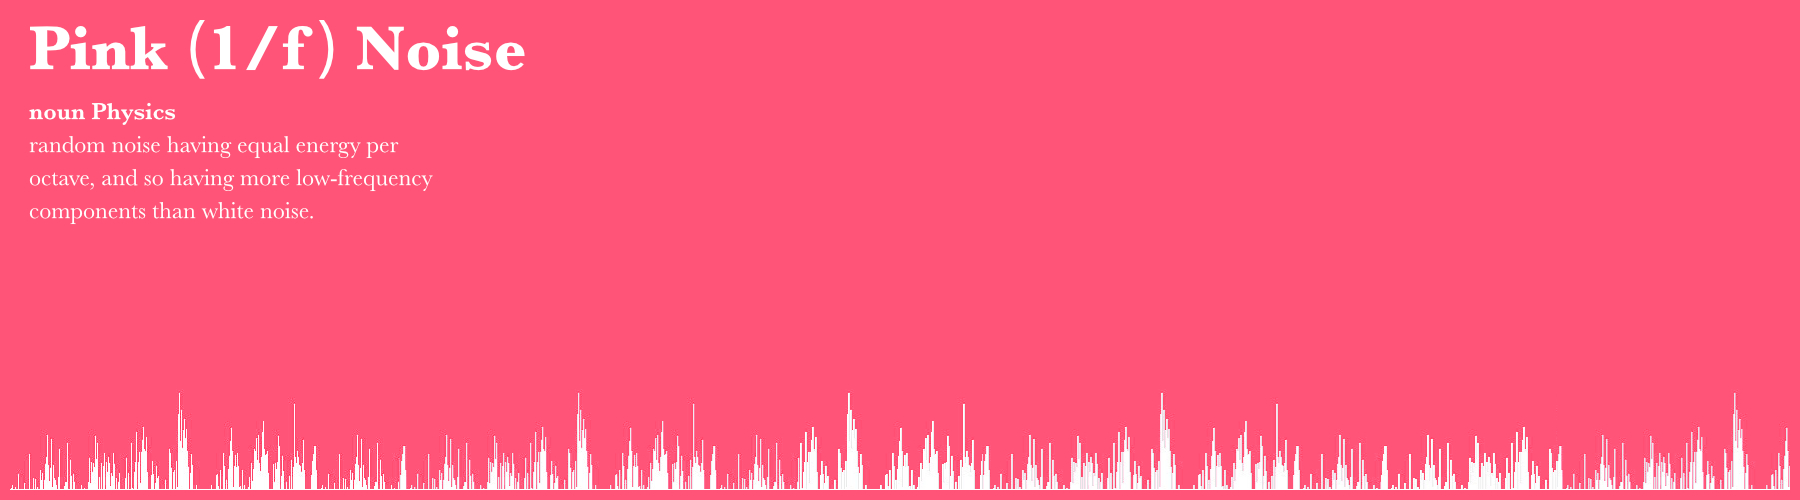 Pink (1/f) Noise